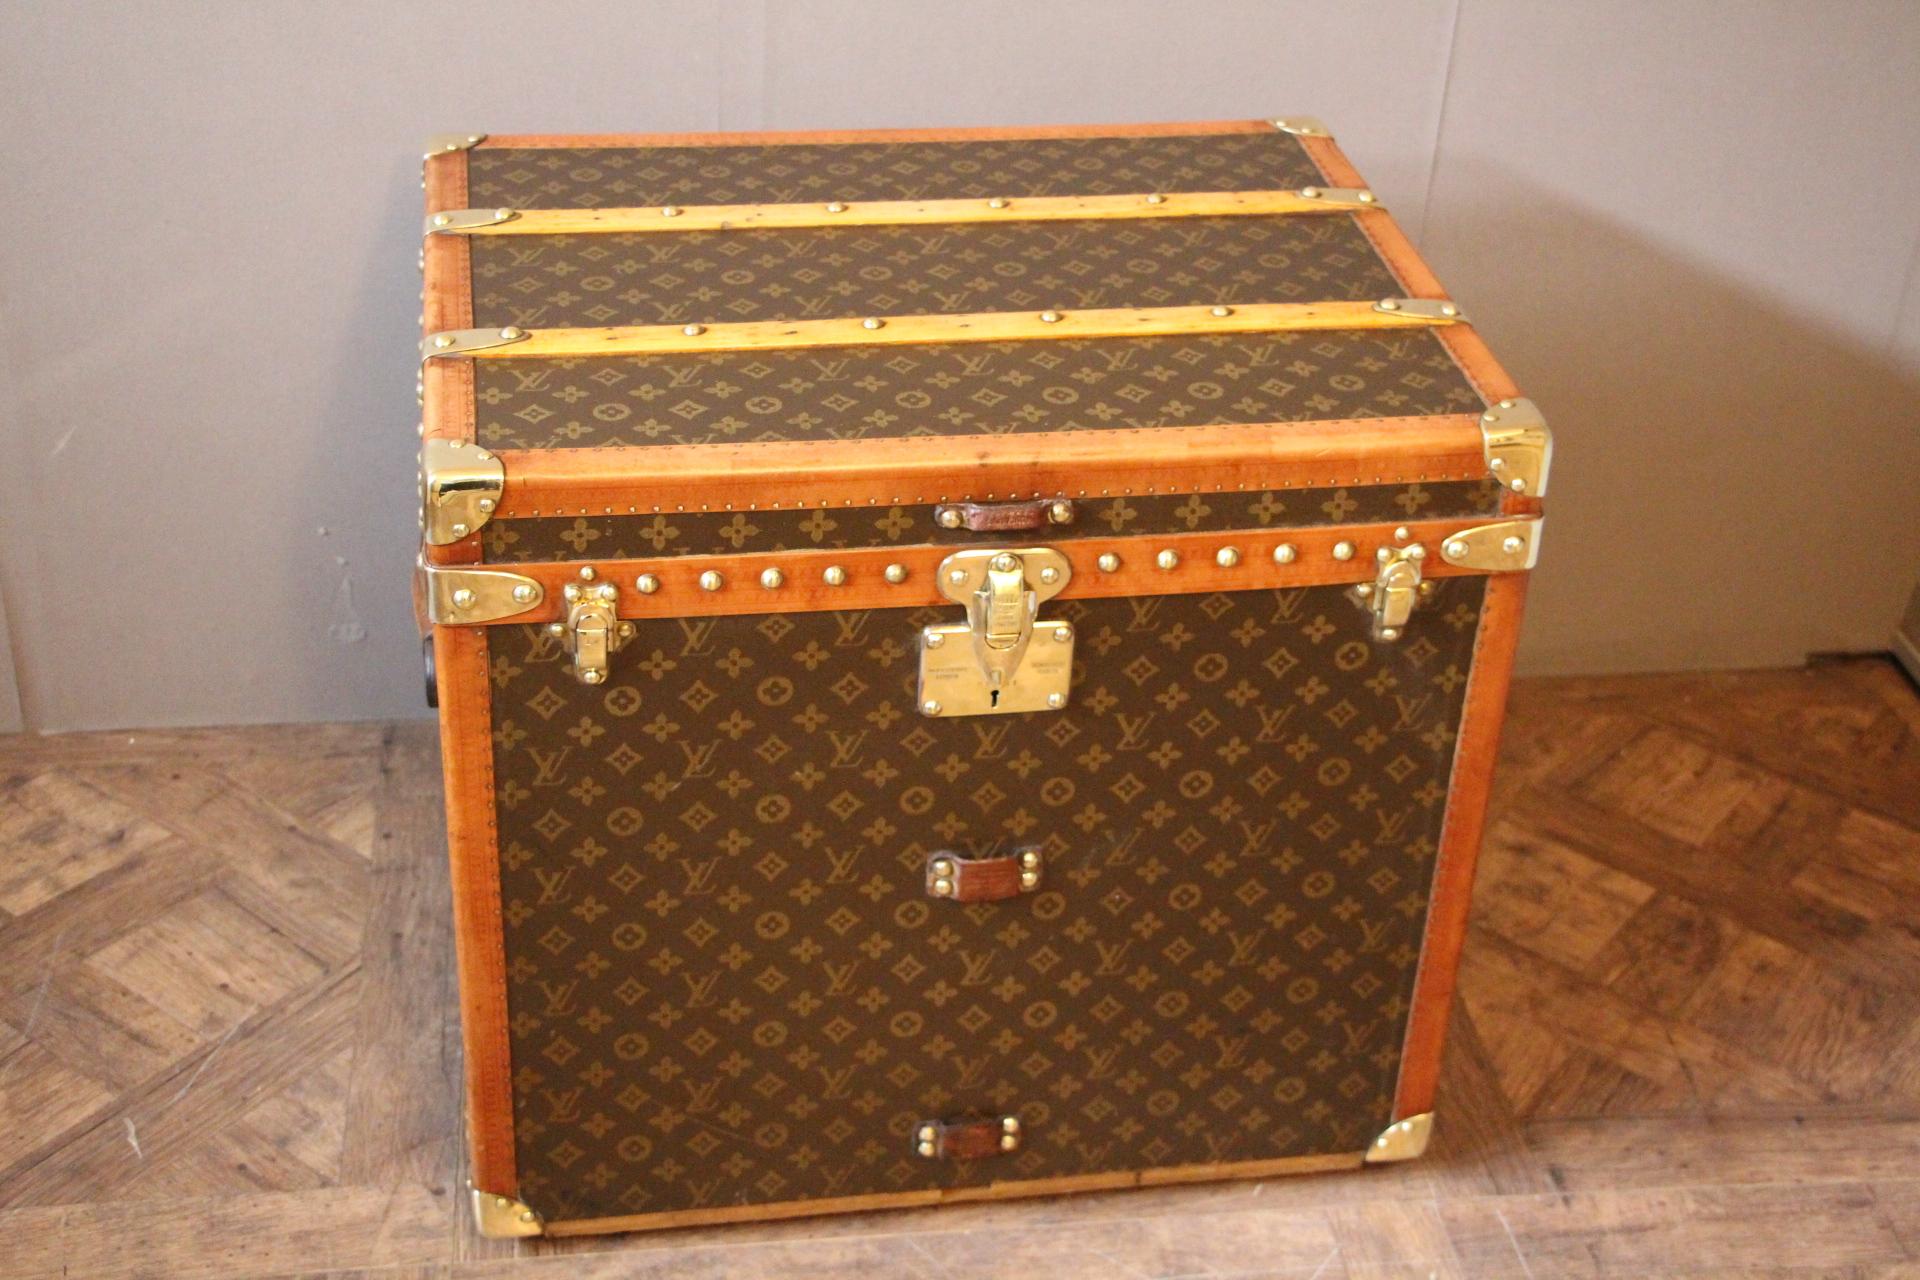 Very rare Louis Vuitton trunk in the very sought after shape.
All stencilled monograms.
Lozine trim, stamped Louis Vuitton locks and studs and leather handles.
Original inside lining. Original removable webbed basket. Louis Vuitton sticker with